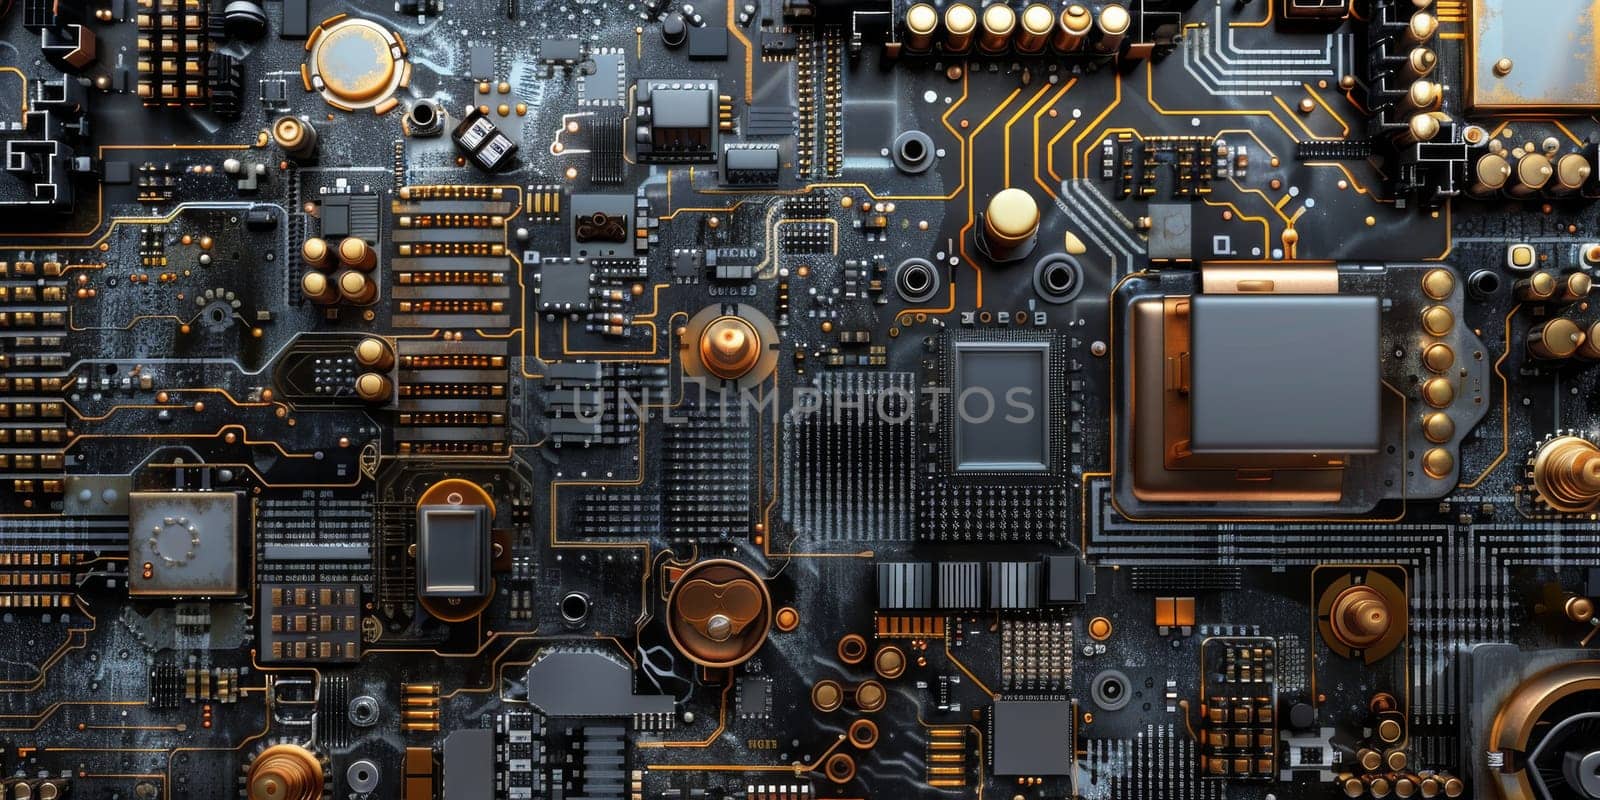 Circuitry of electronic components, highlighting the metallic surfaces and micro-scale details of computer chips by Kadula